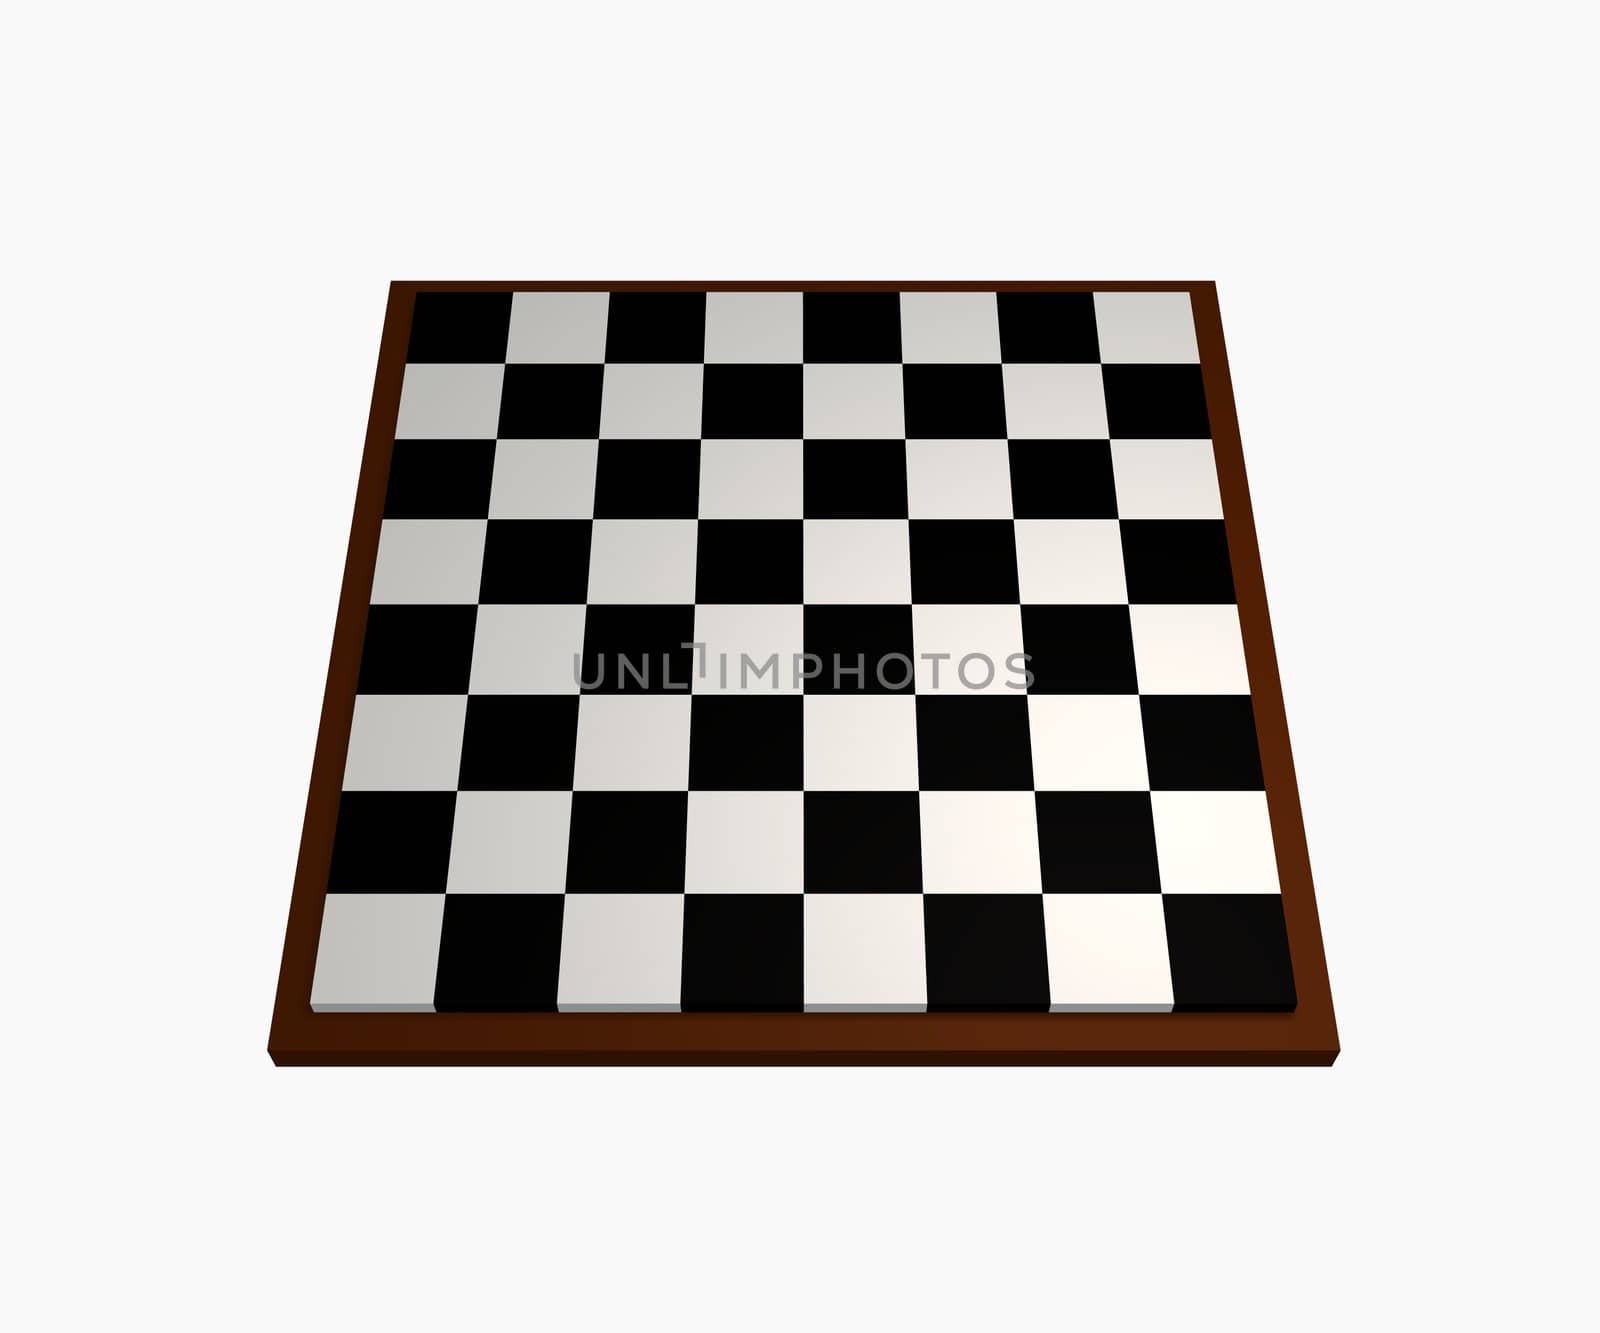 Illustrated chess board on a white background 